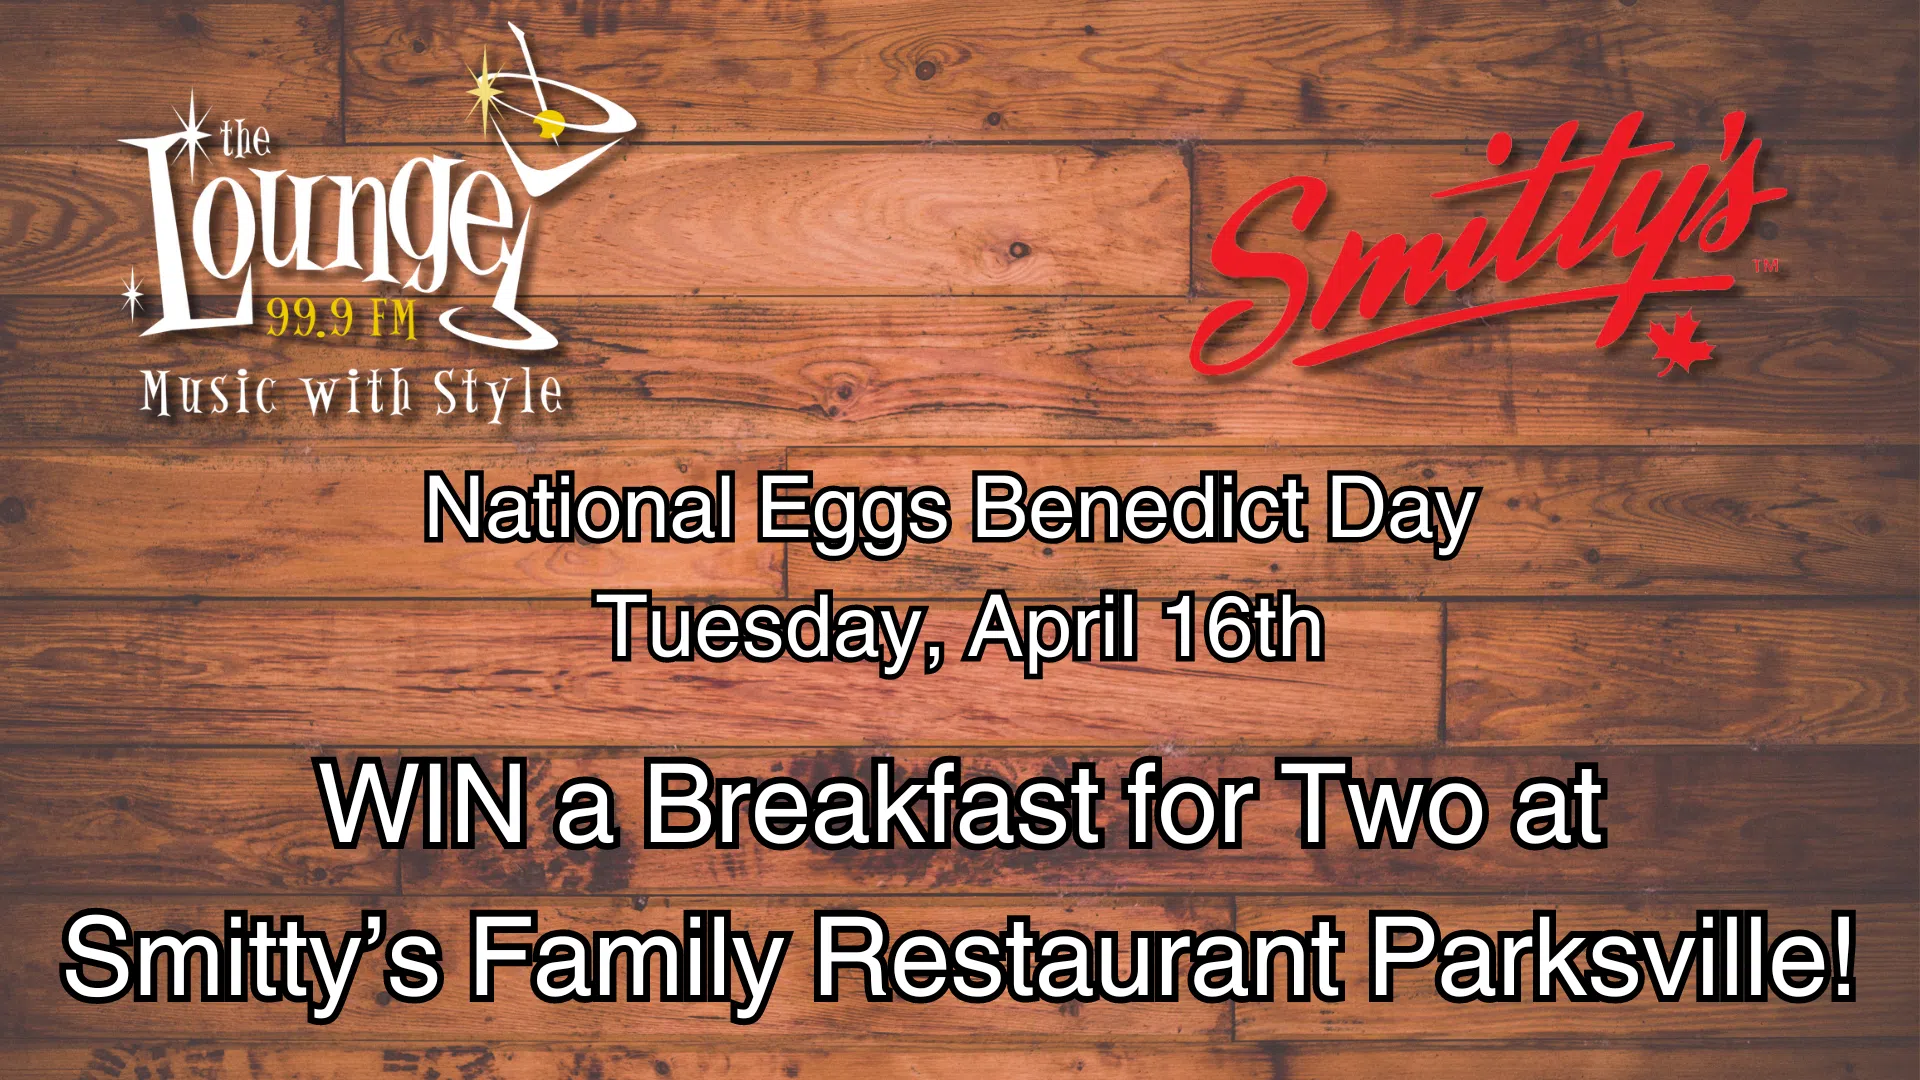 WIN Breakfast for Two - Enter IN PERSON ONLY